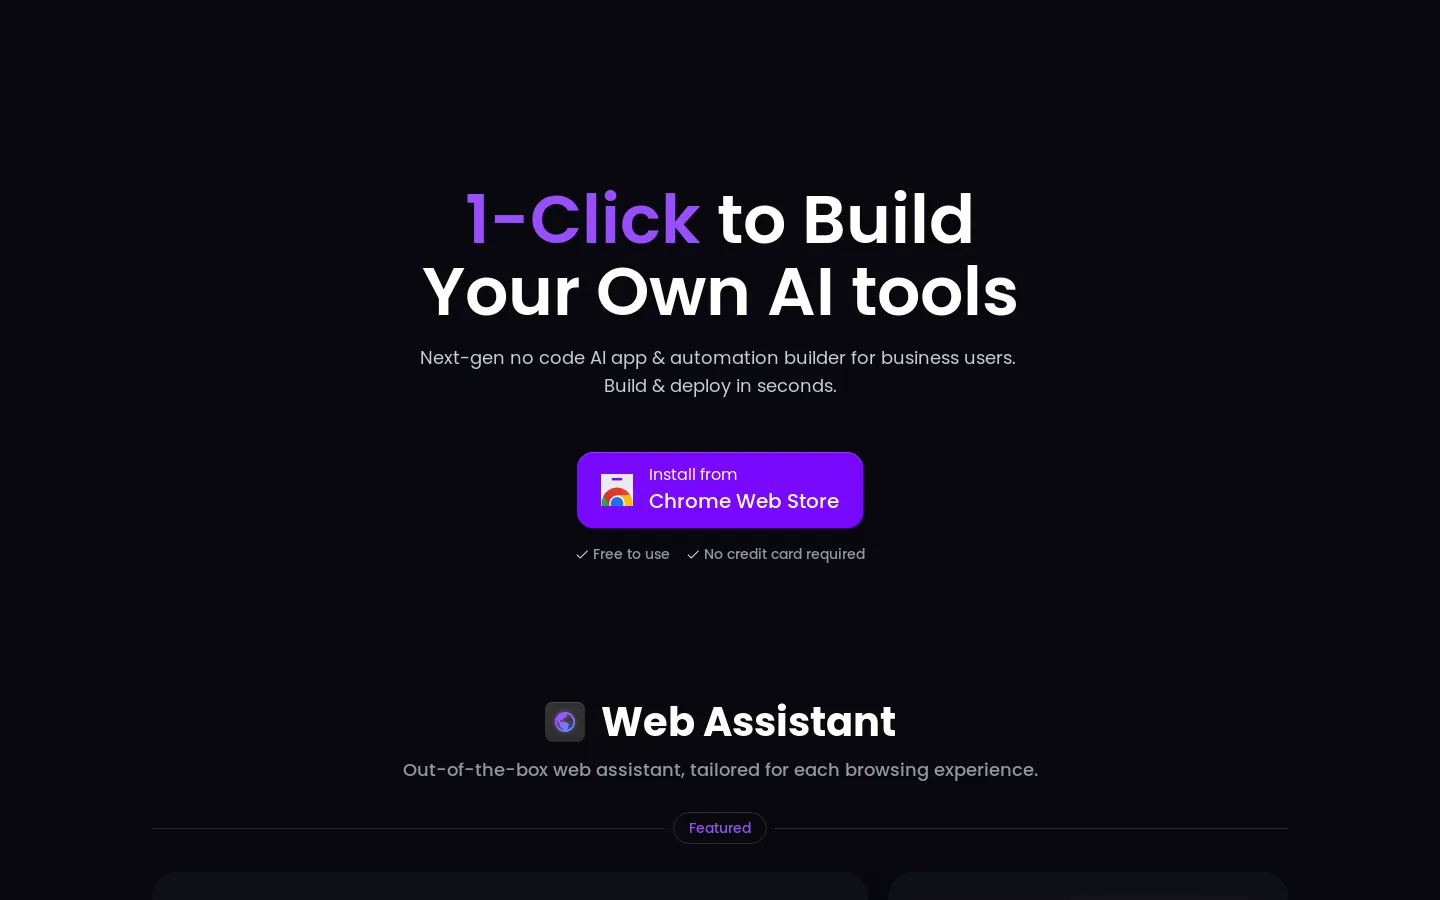 Thunderbit: All-in-one AI toolkit / No Code App & Automation